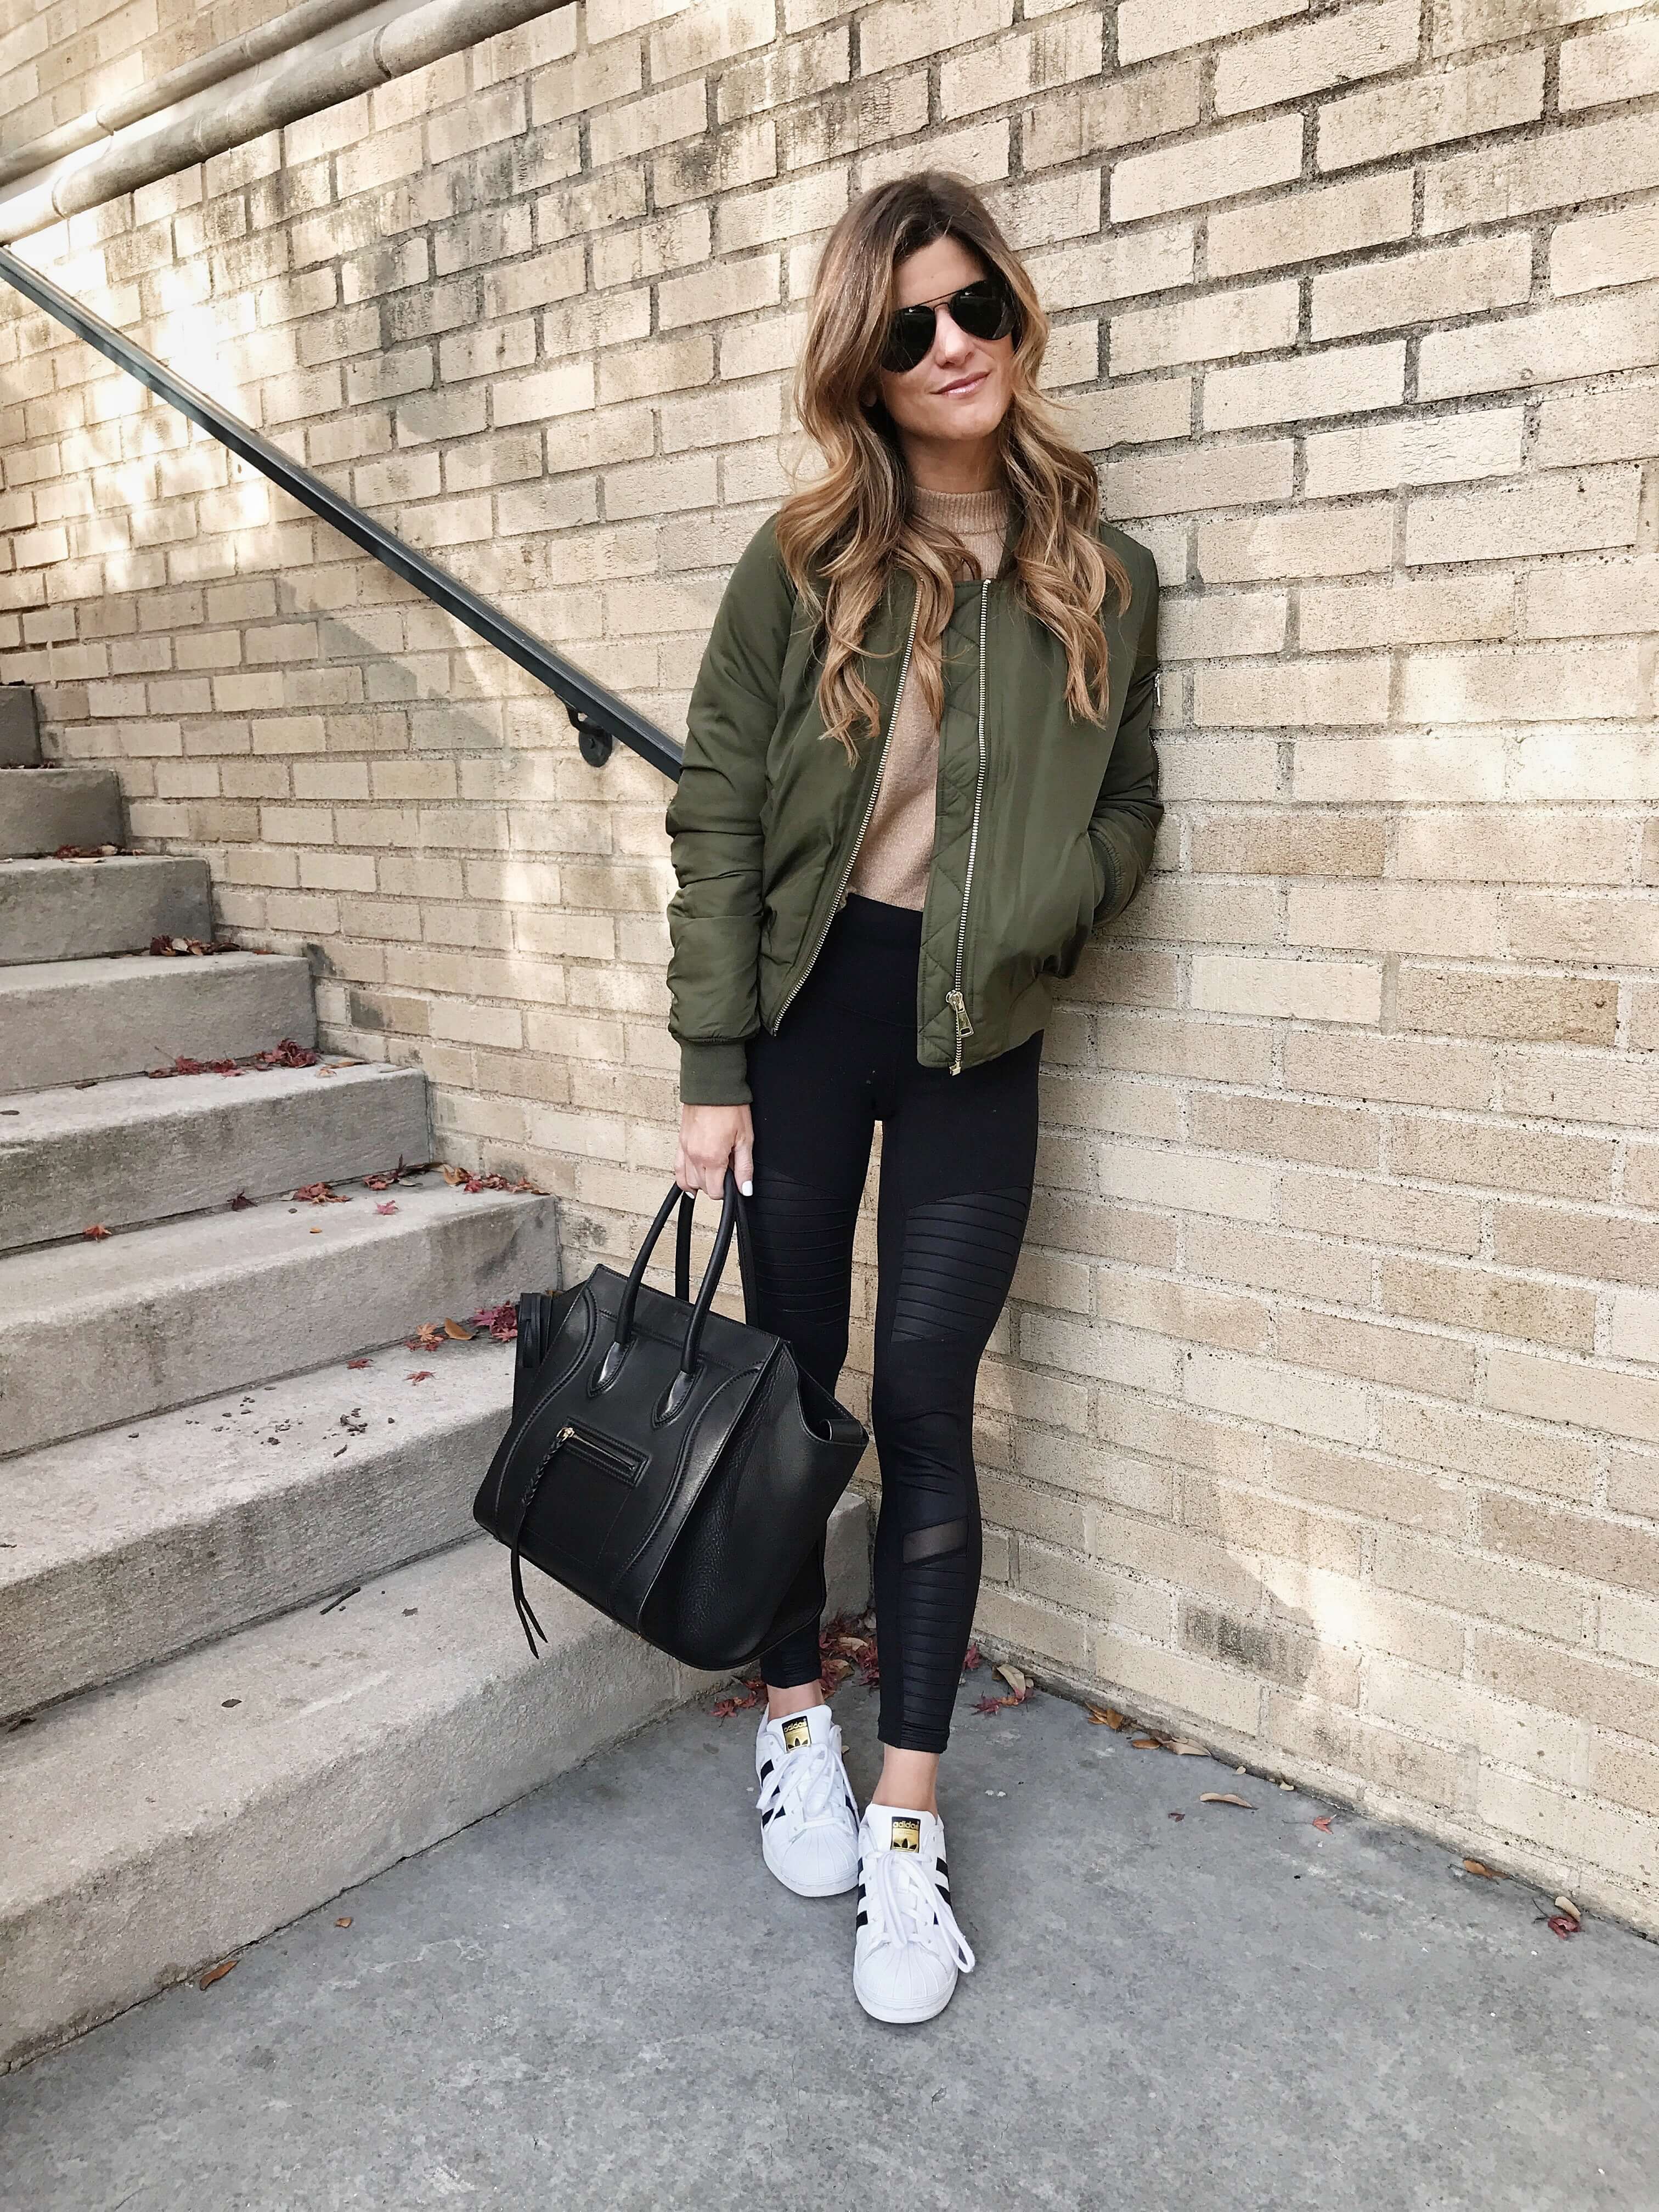 sportswear lux trend, moto AYO leggings, adidas allstar sneakers, topshop olive green moto jacket, celine phantom bag, casual chic outfit, bomber jacket outfit